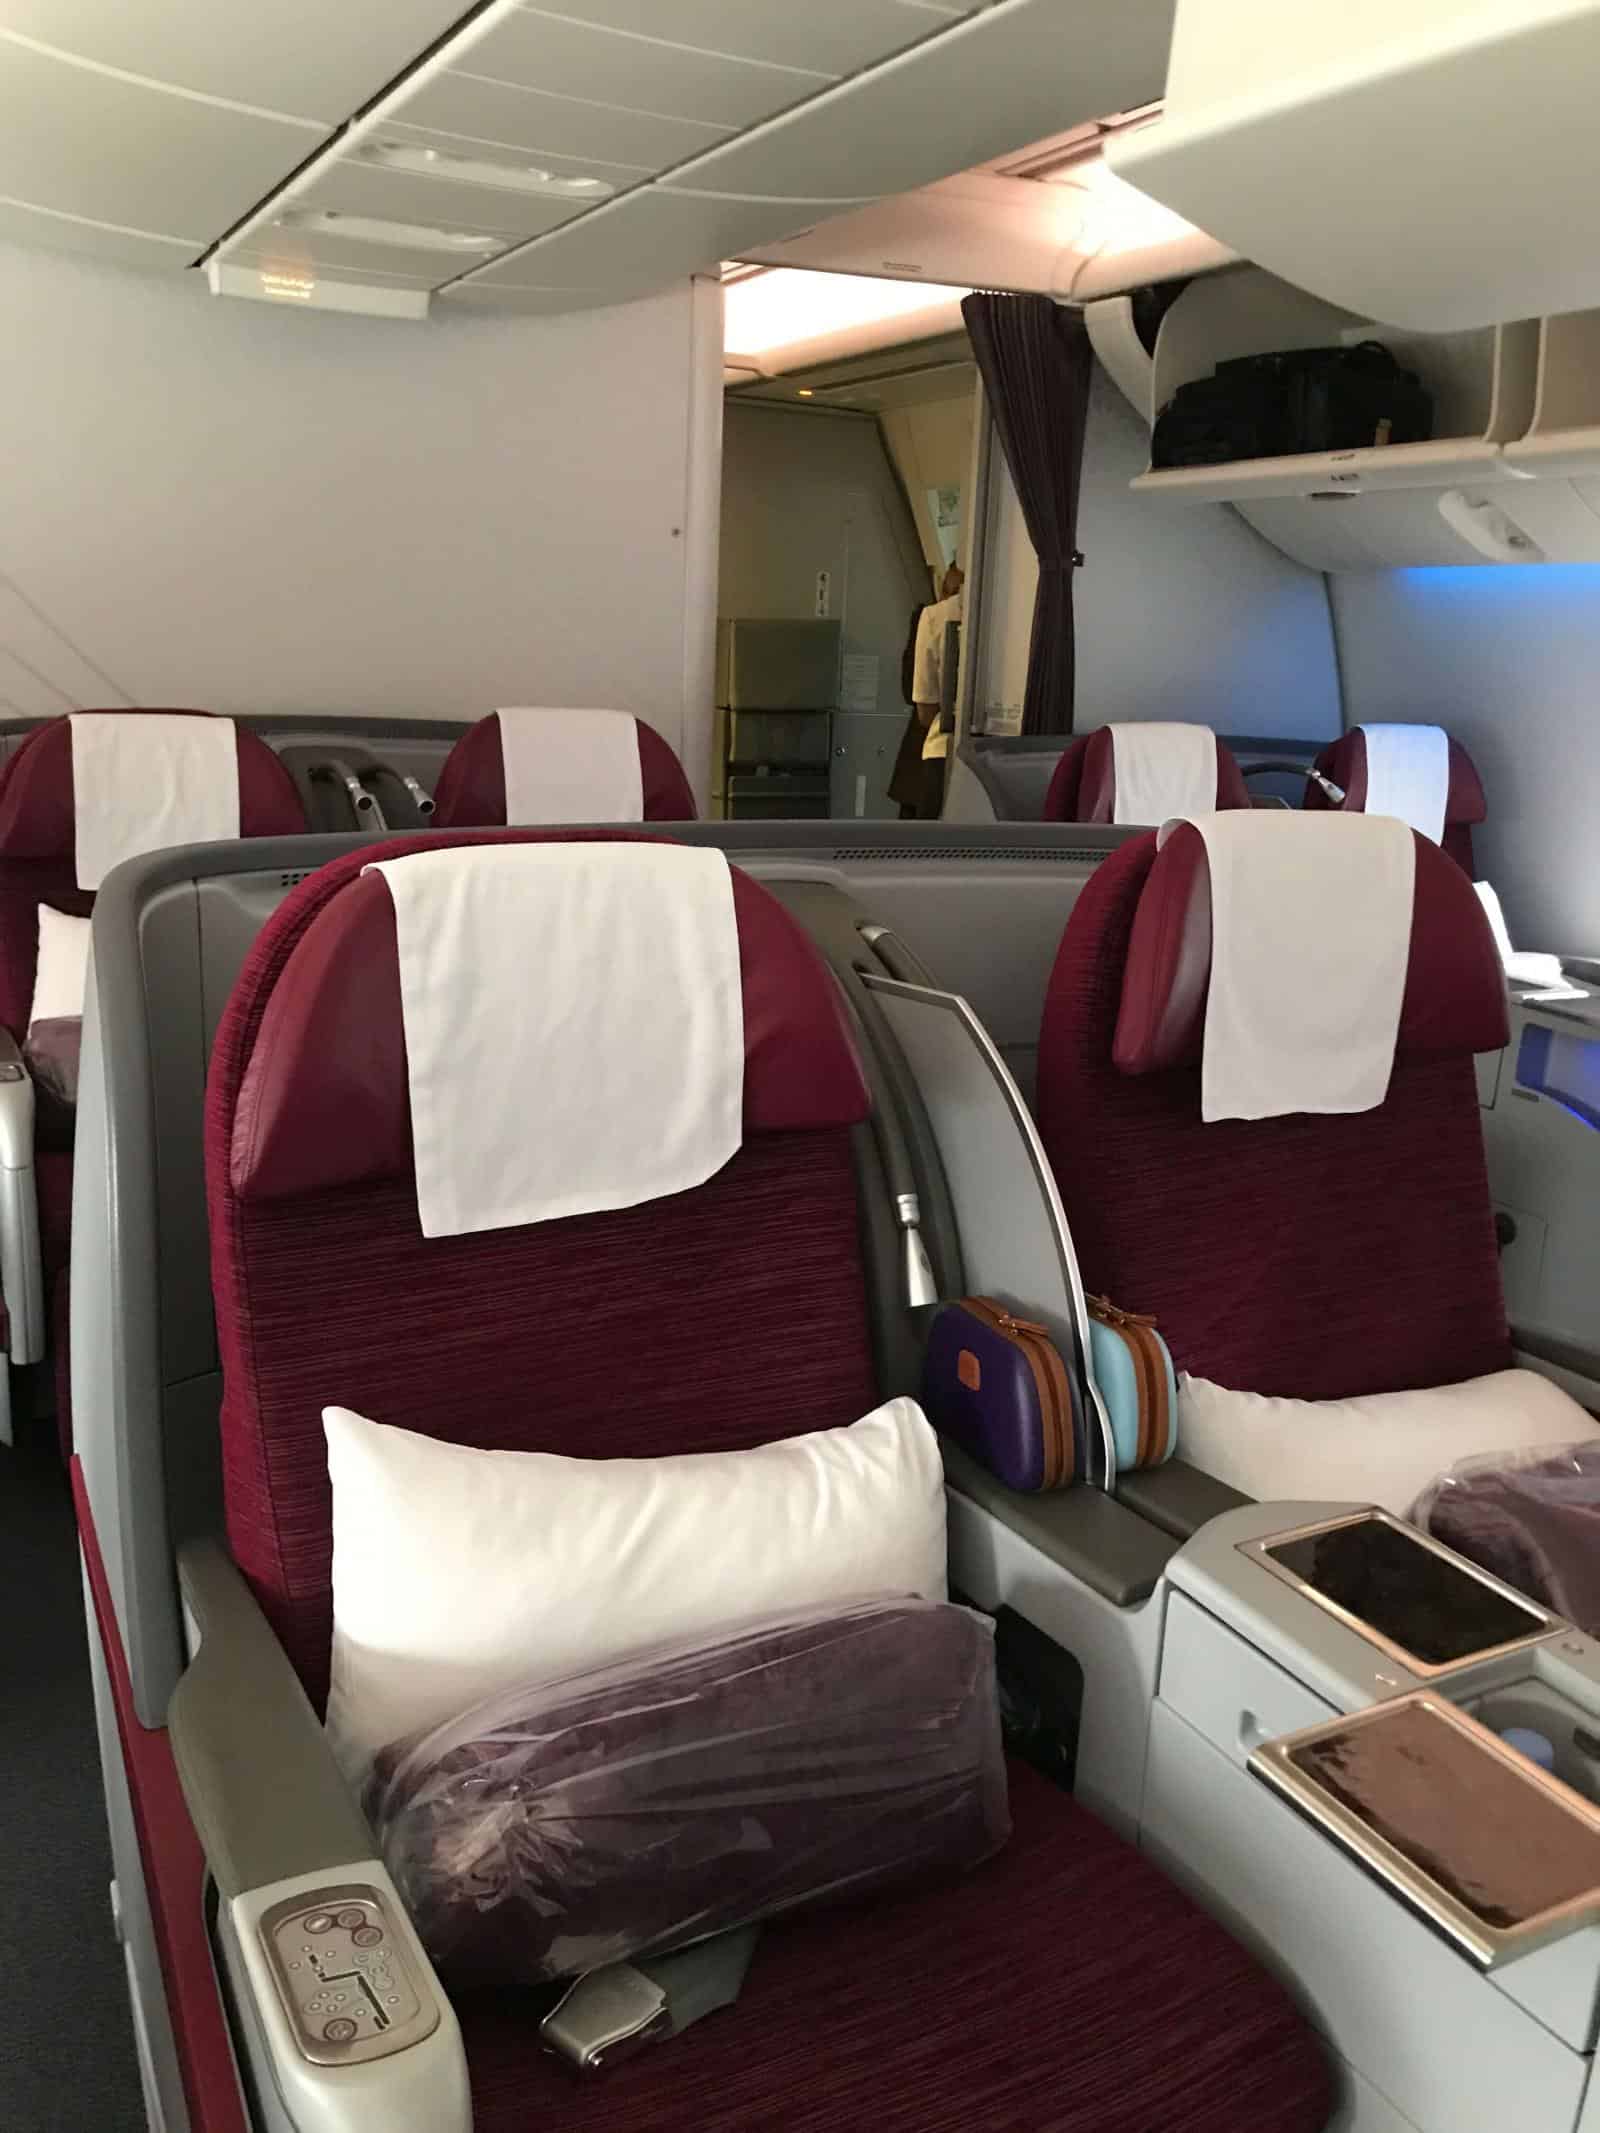 Does Qatar airways serve alcohol in business class?